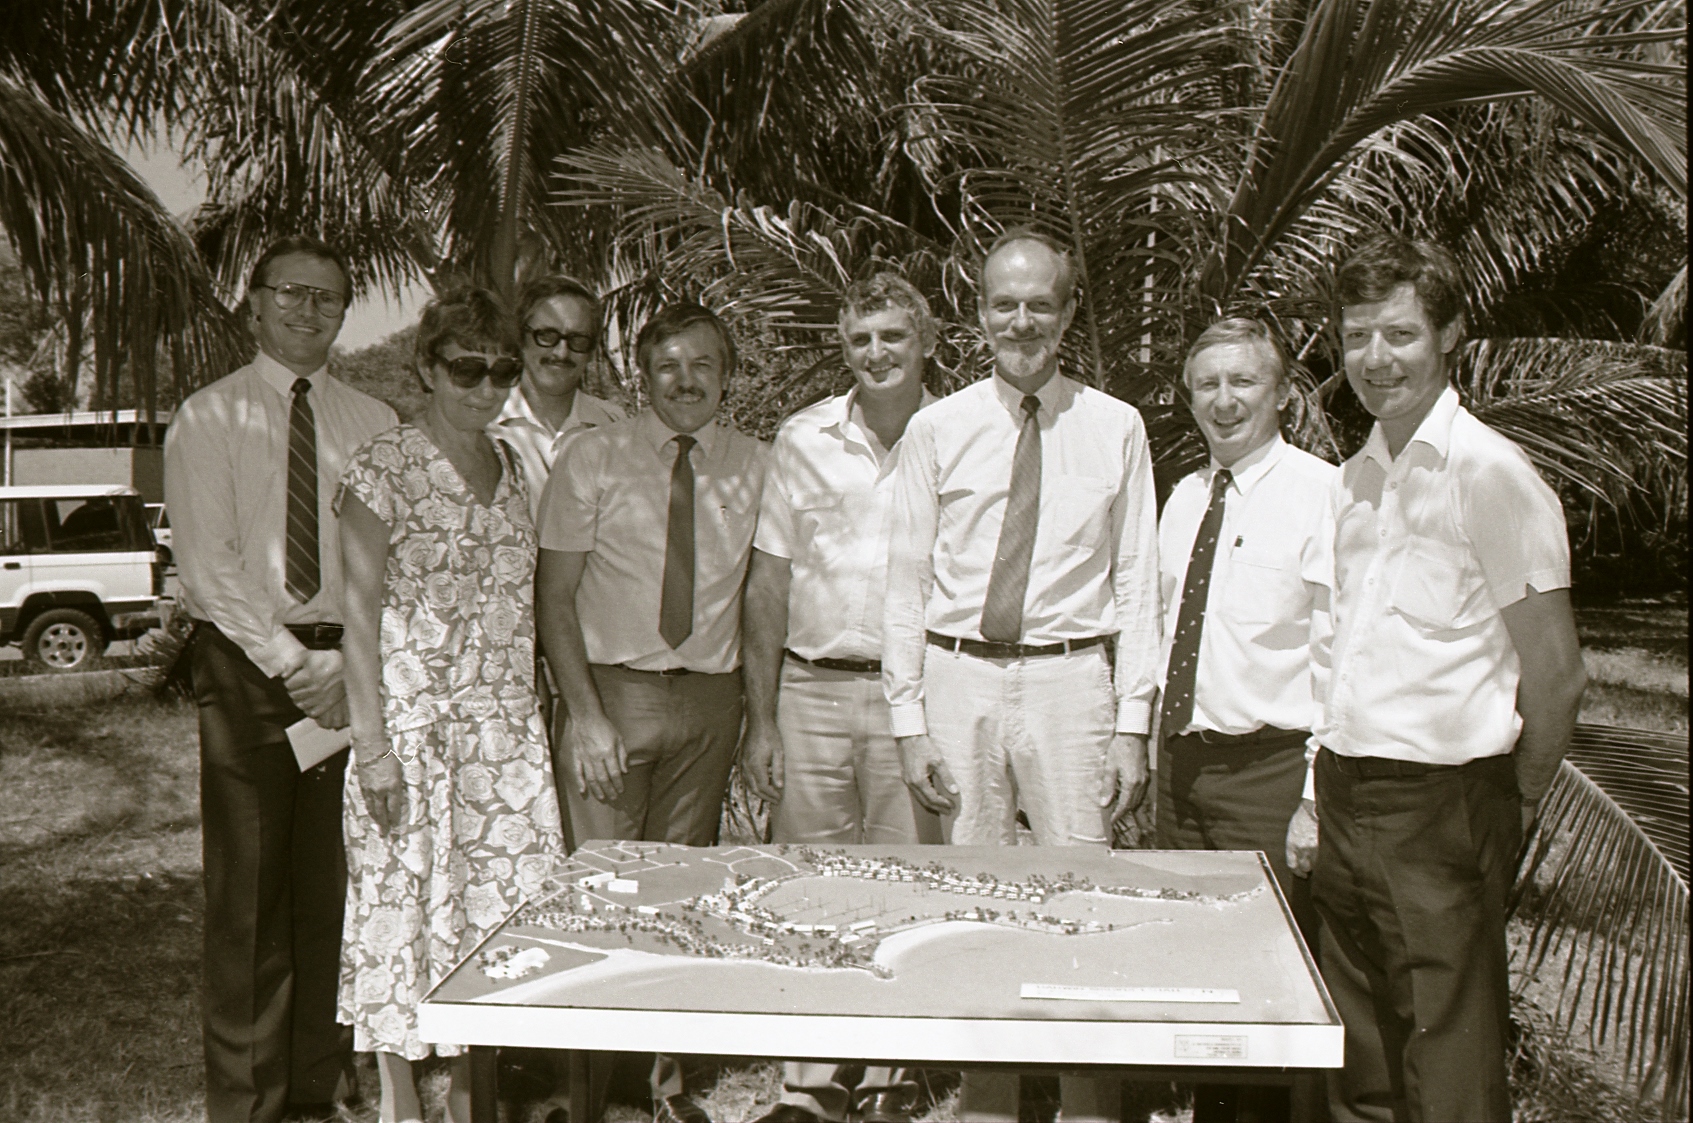 [Kahlin Marine Estate (Cullen Bay) signing, 26 May 1988] Image courtesy of Northern Territory Archives Service, Department of the Chief Minister, NTRS 3823 P1, BW 2726, Item 22